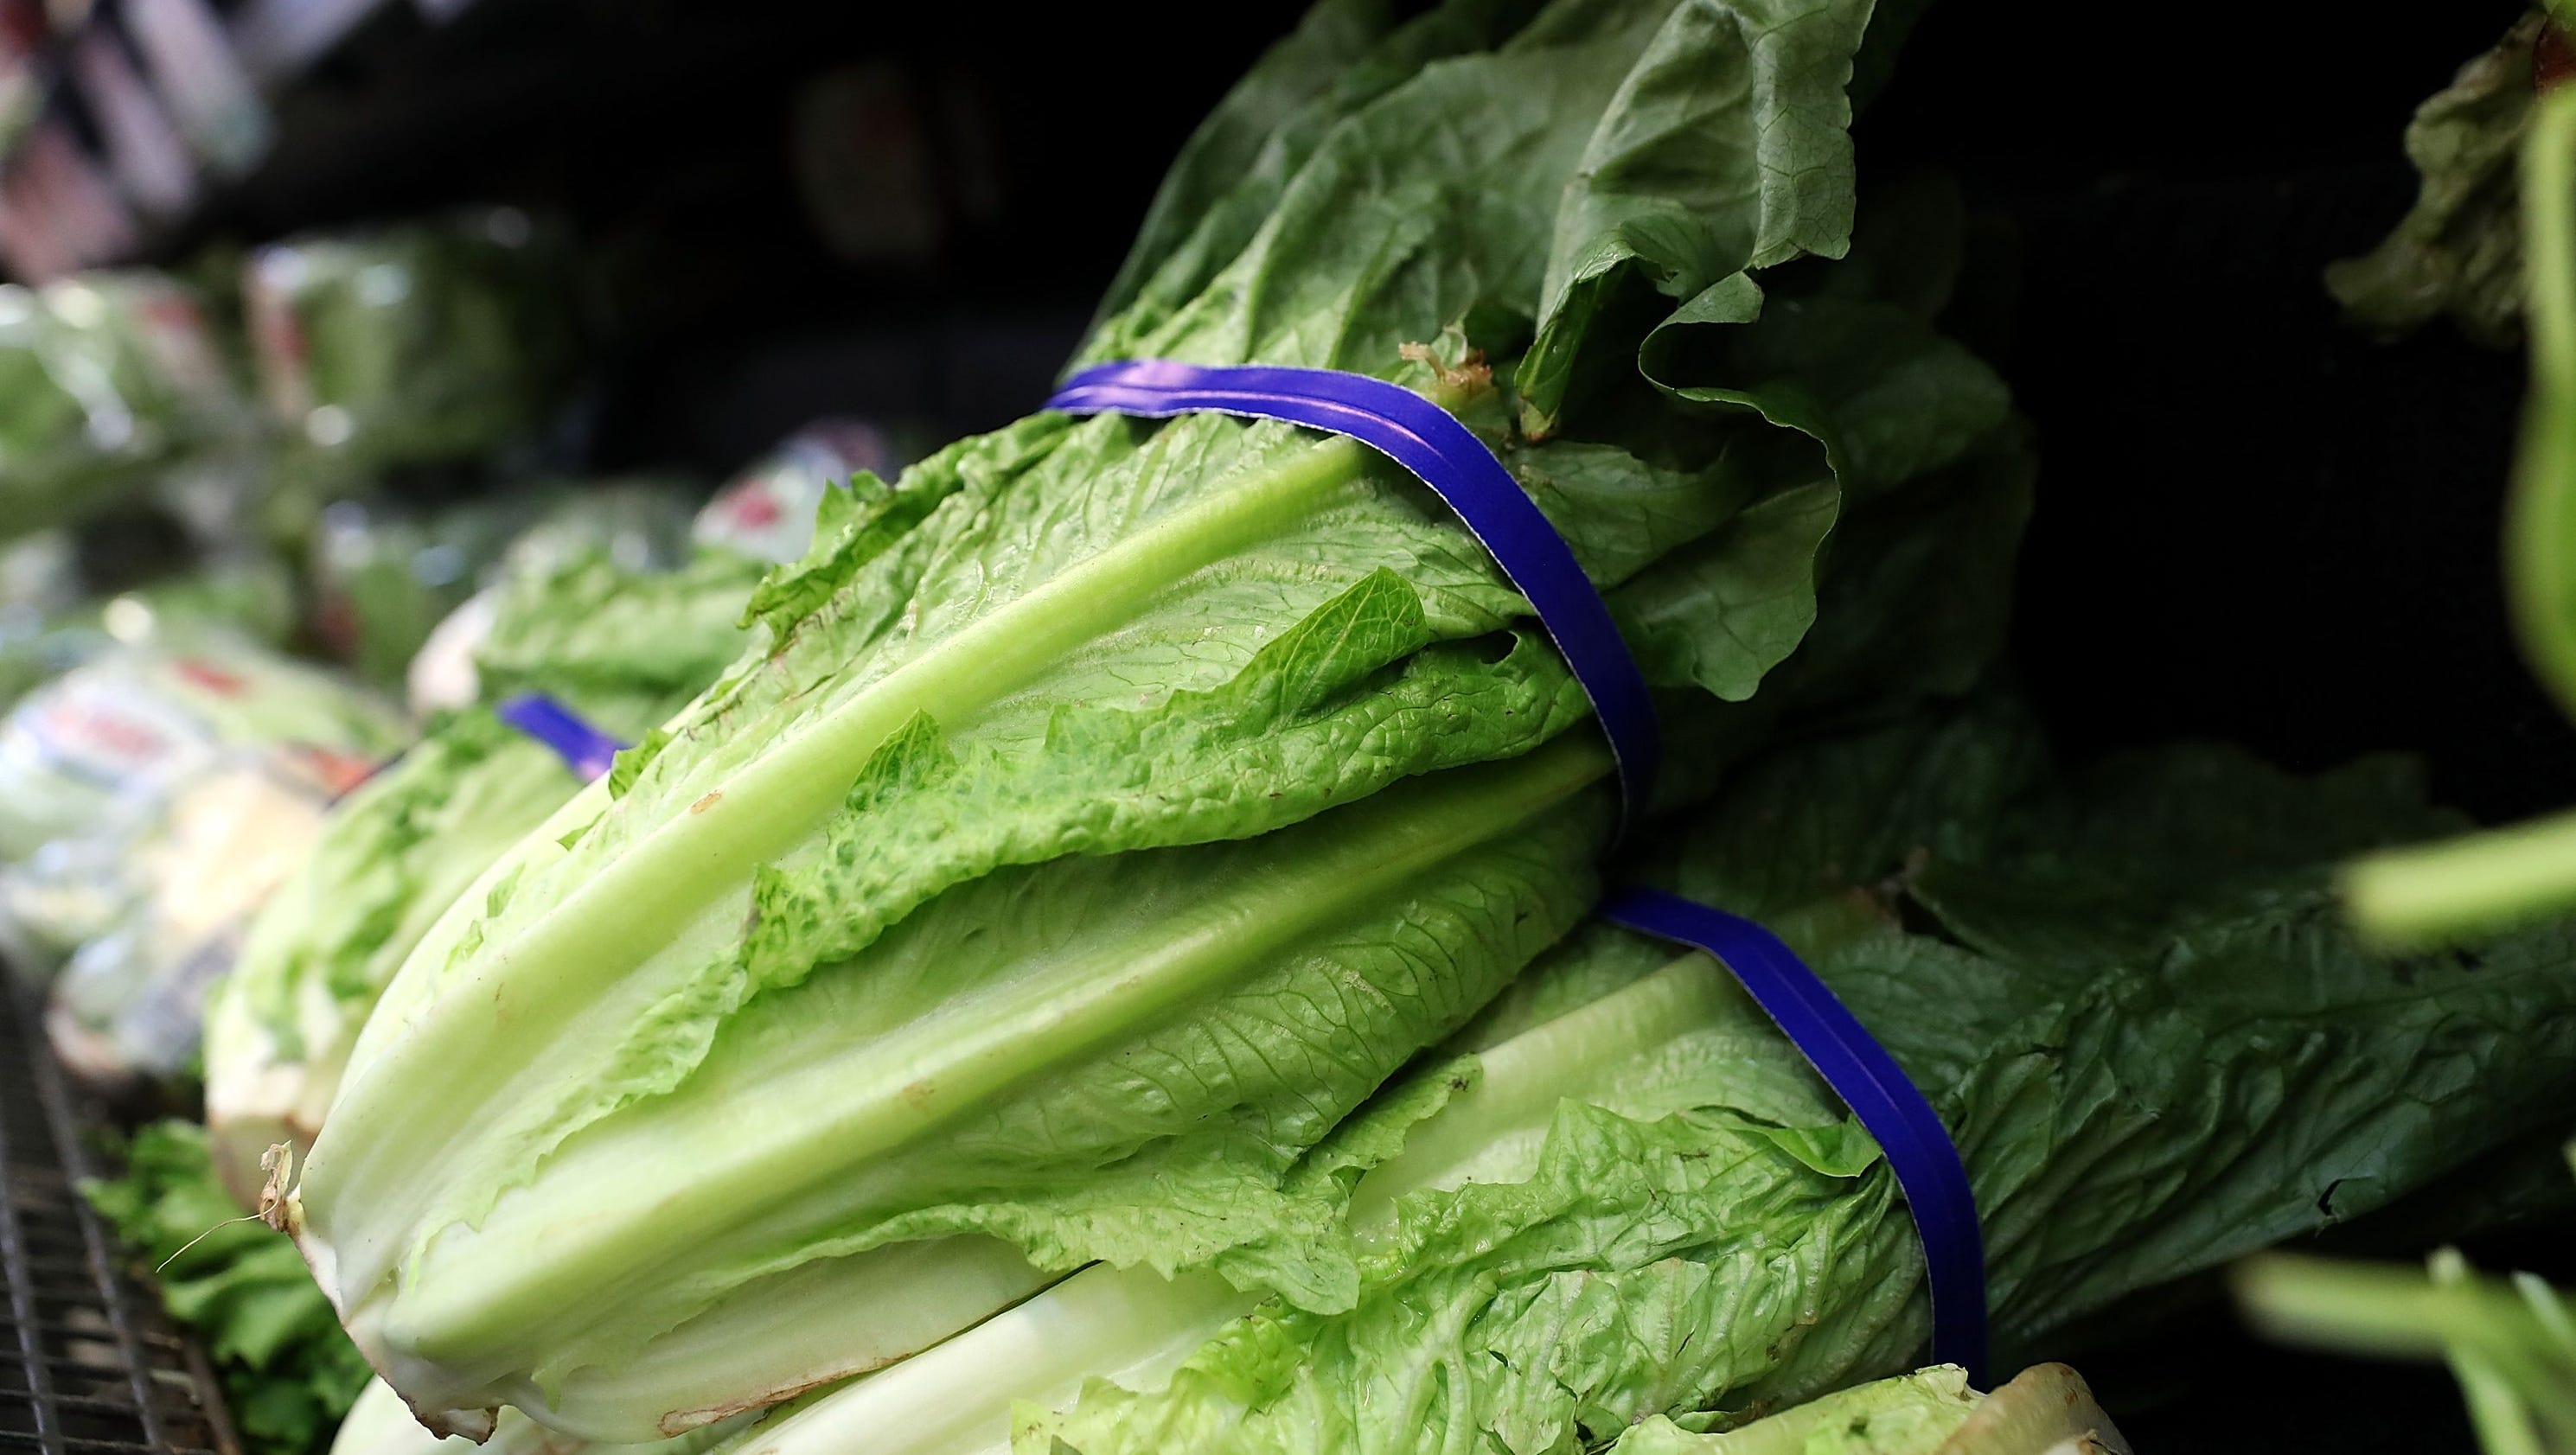 E. coli outbreak tied to romaine lettuce kills 1 in California, expands to 25 states